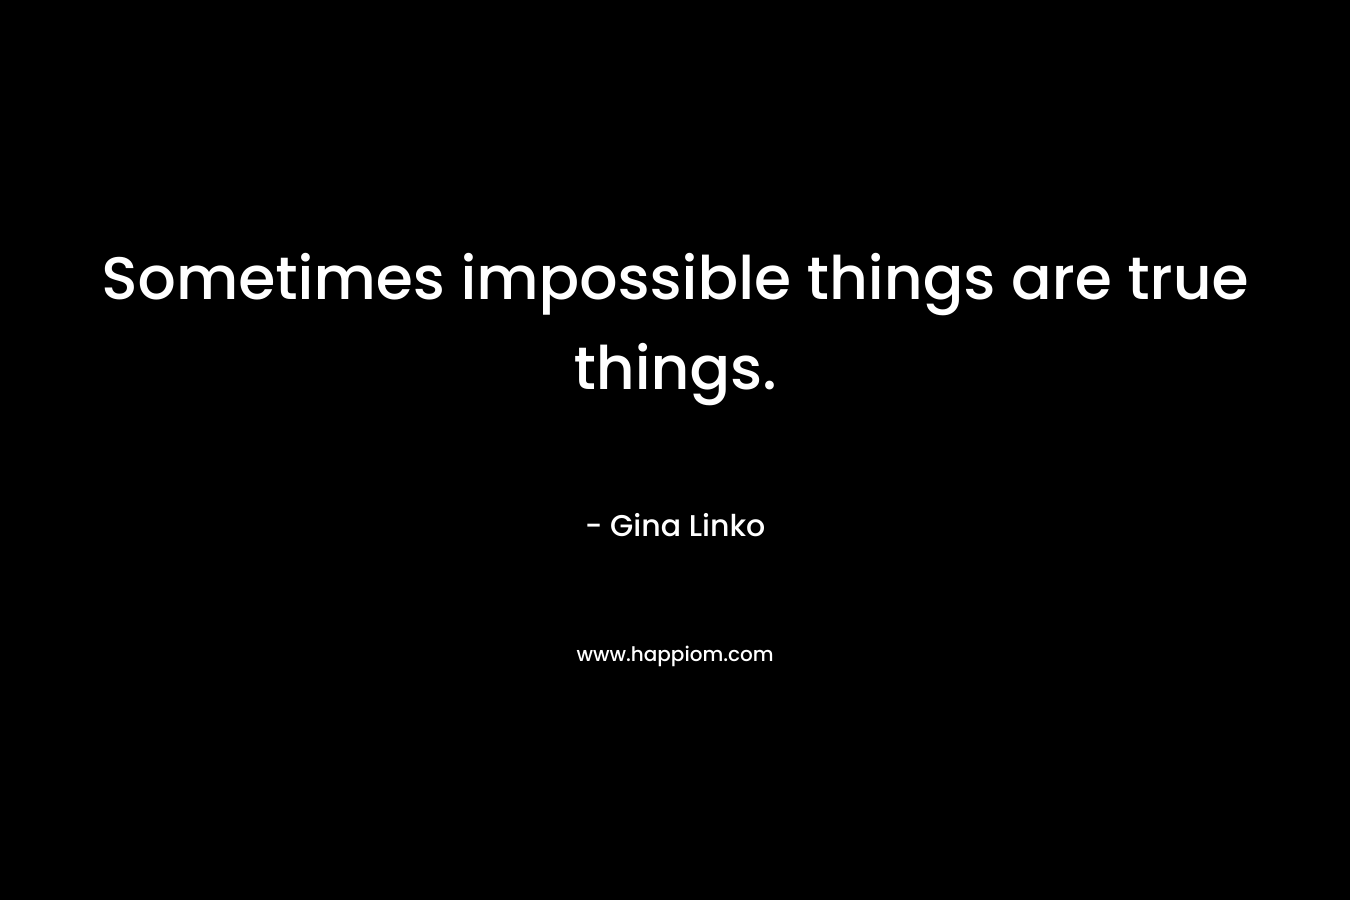 Sometimes impossible things are true things.